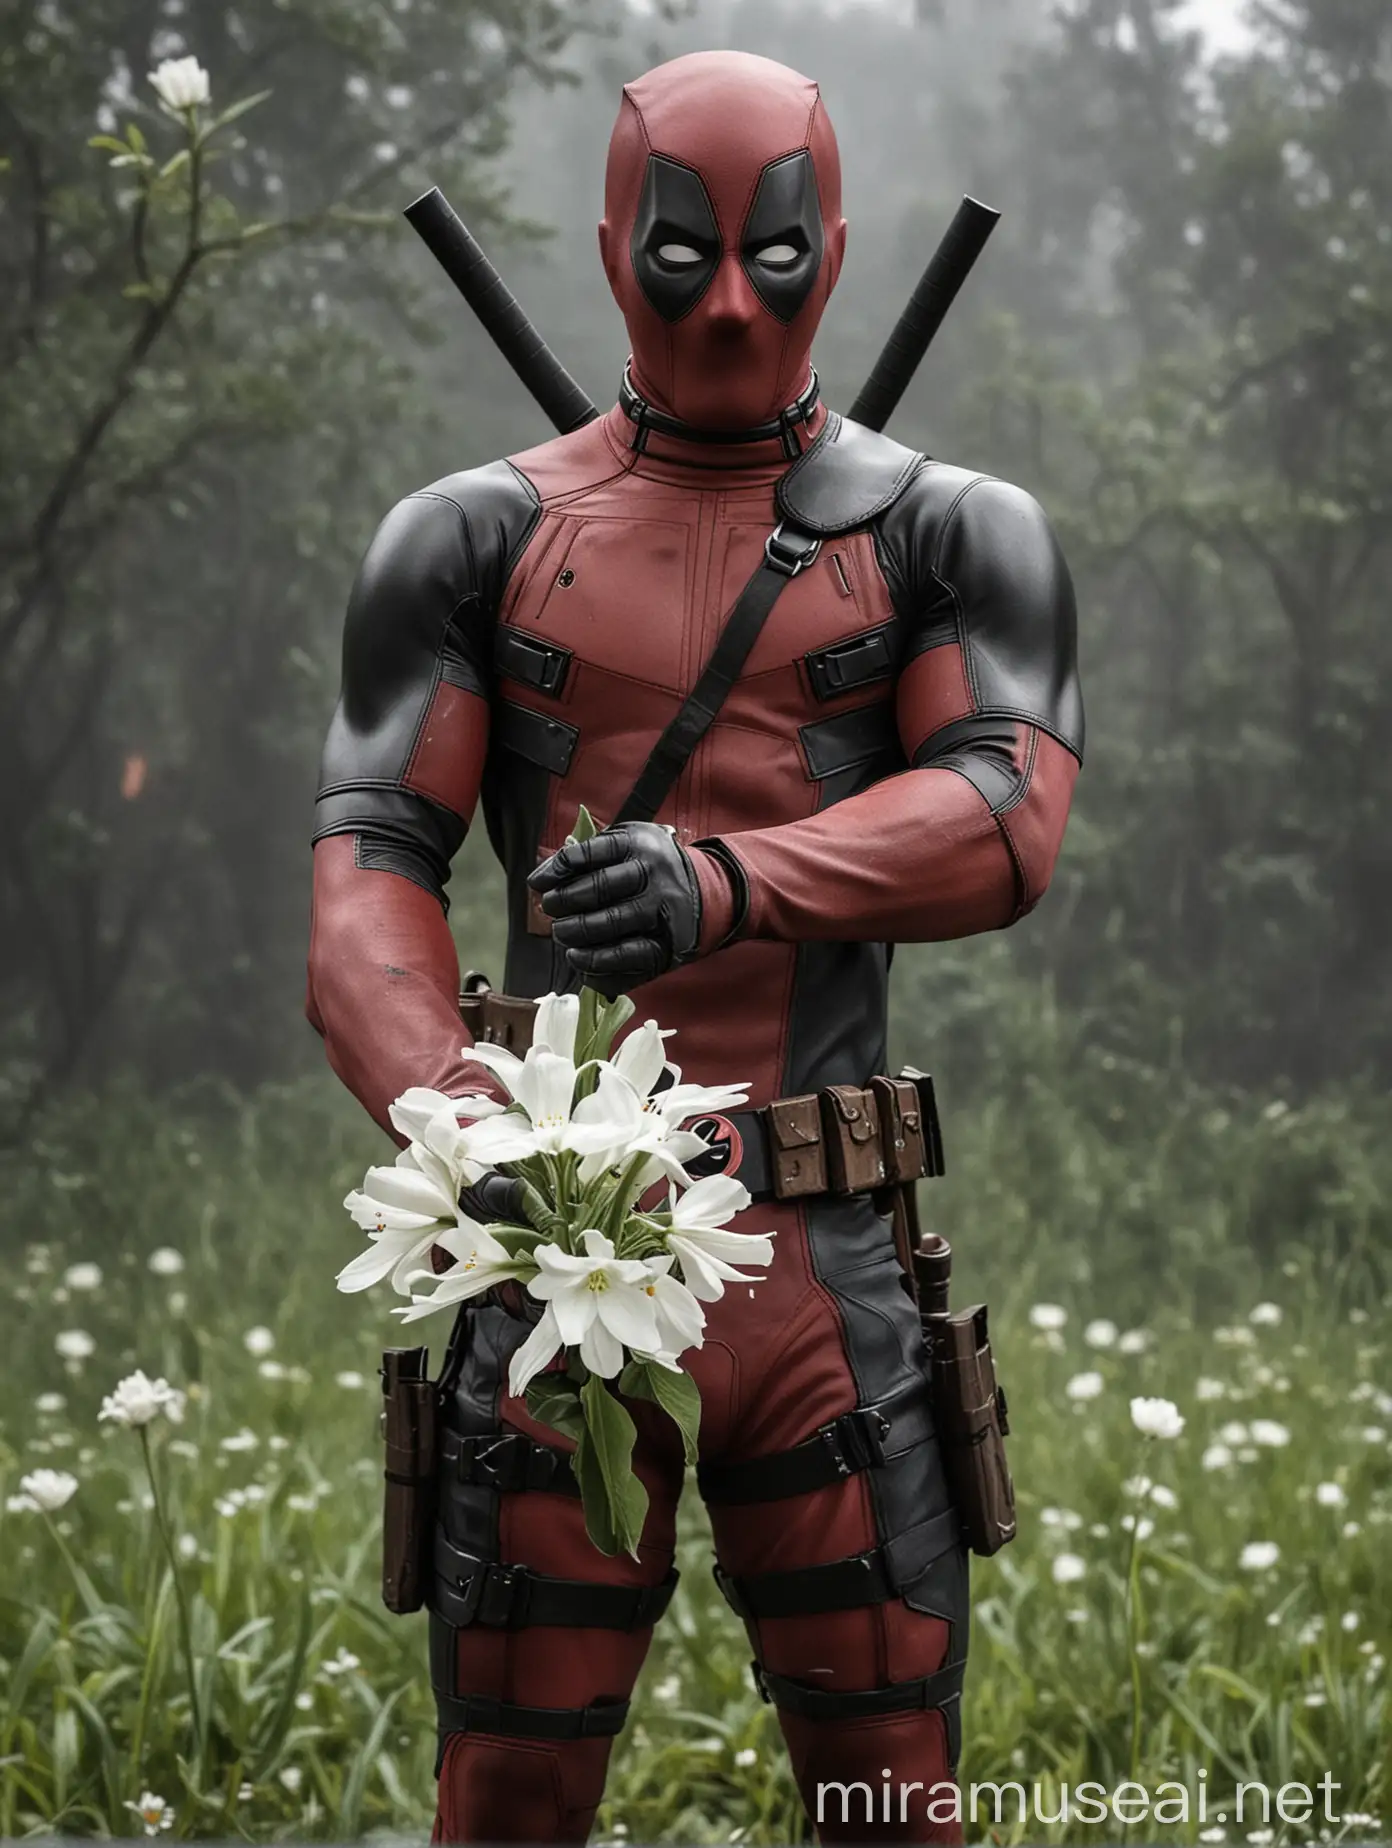 Deadpool Holding a Symbolic White Flower in Tribute